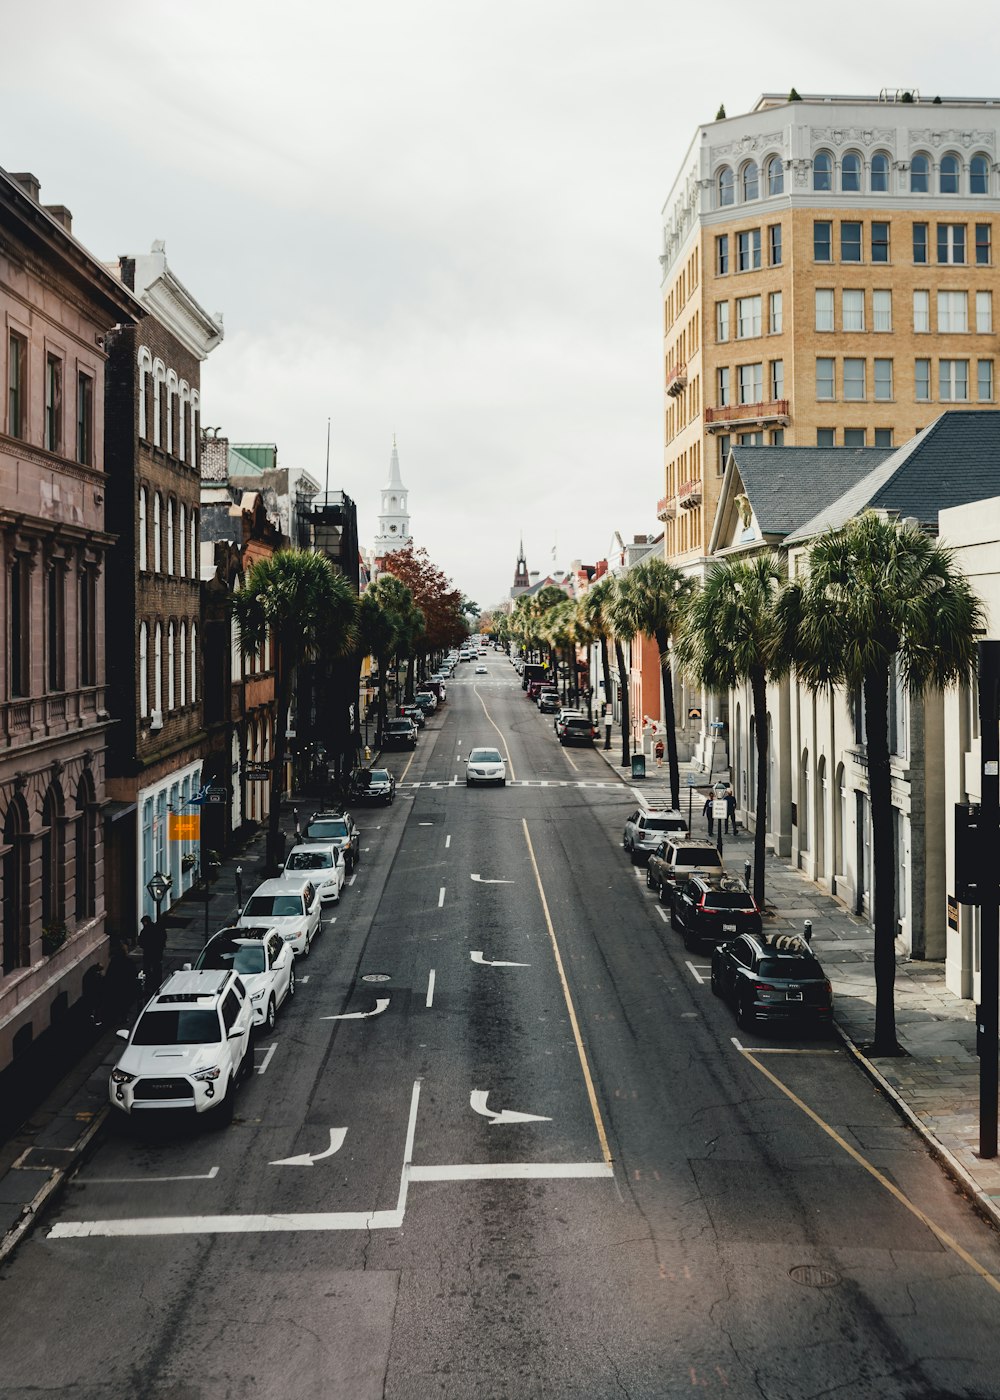 a city street lined with tall buildings and palm trees